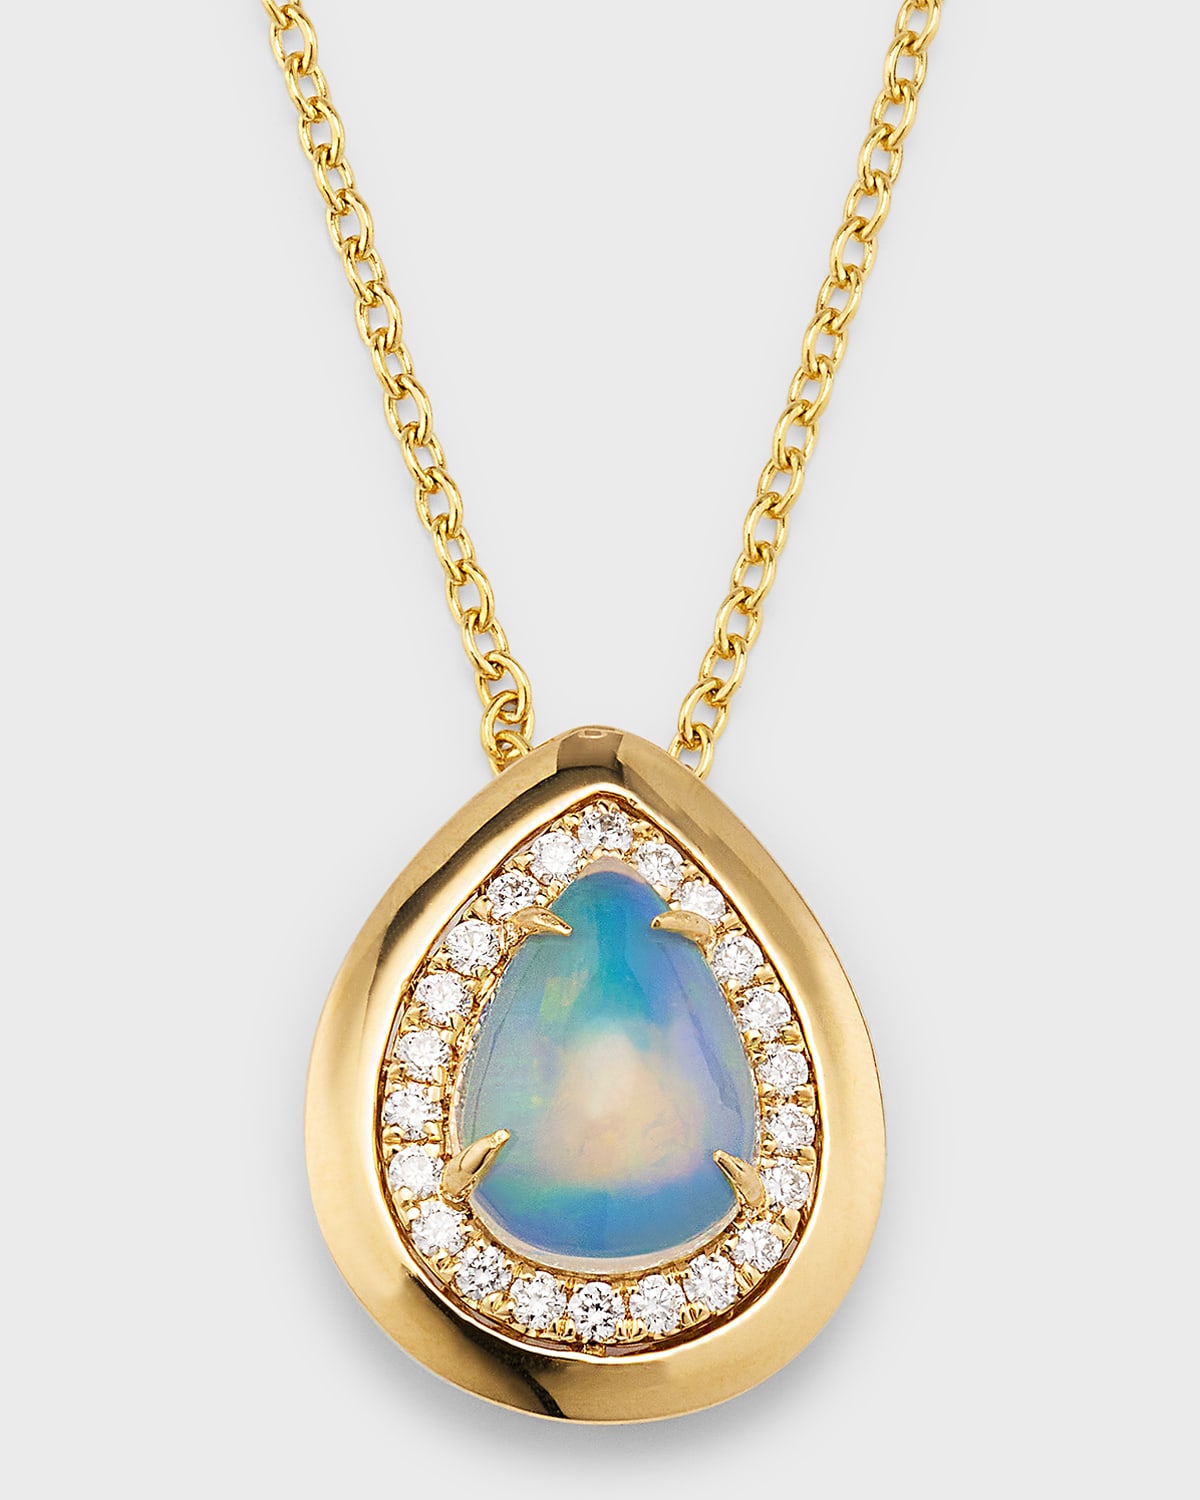 18K Yellow Gold Pendant with Pear Shape Opal and Diamonds, 1.37tcw